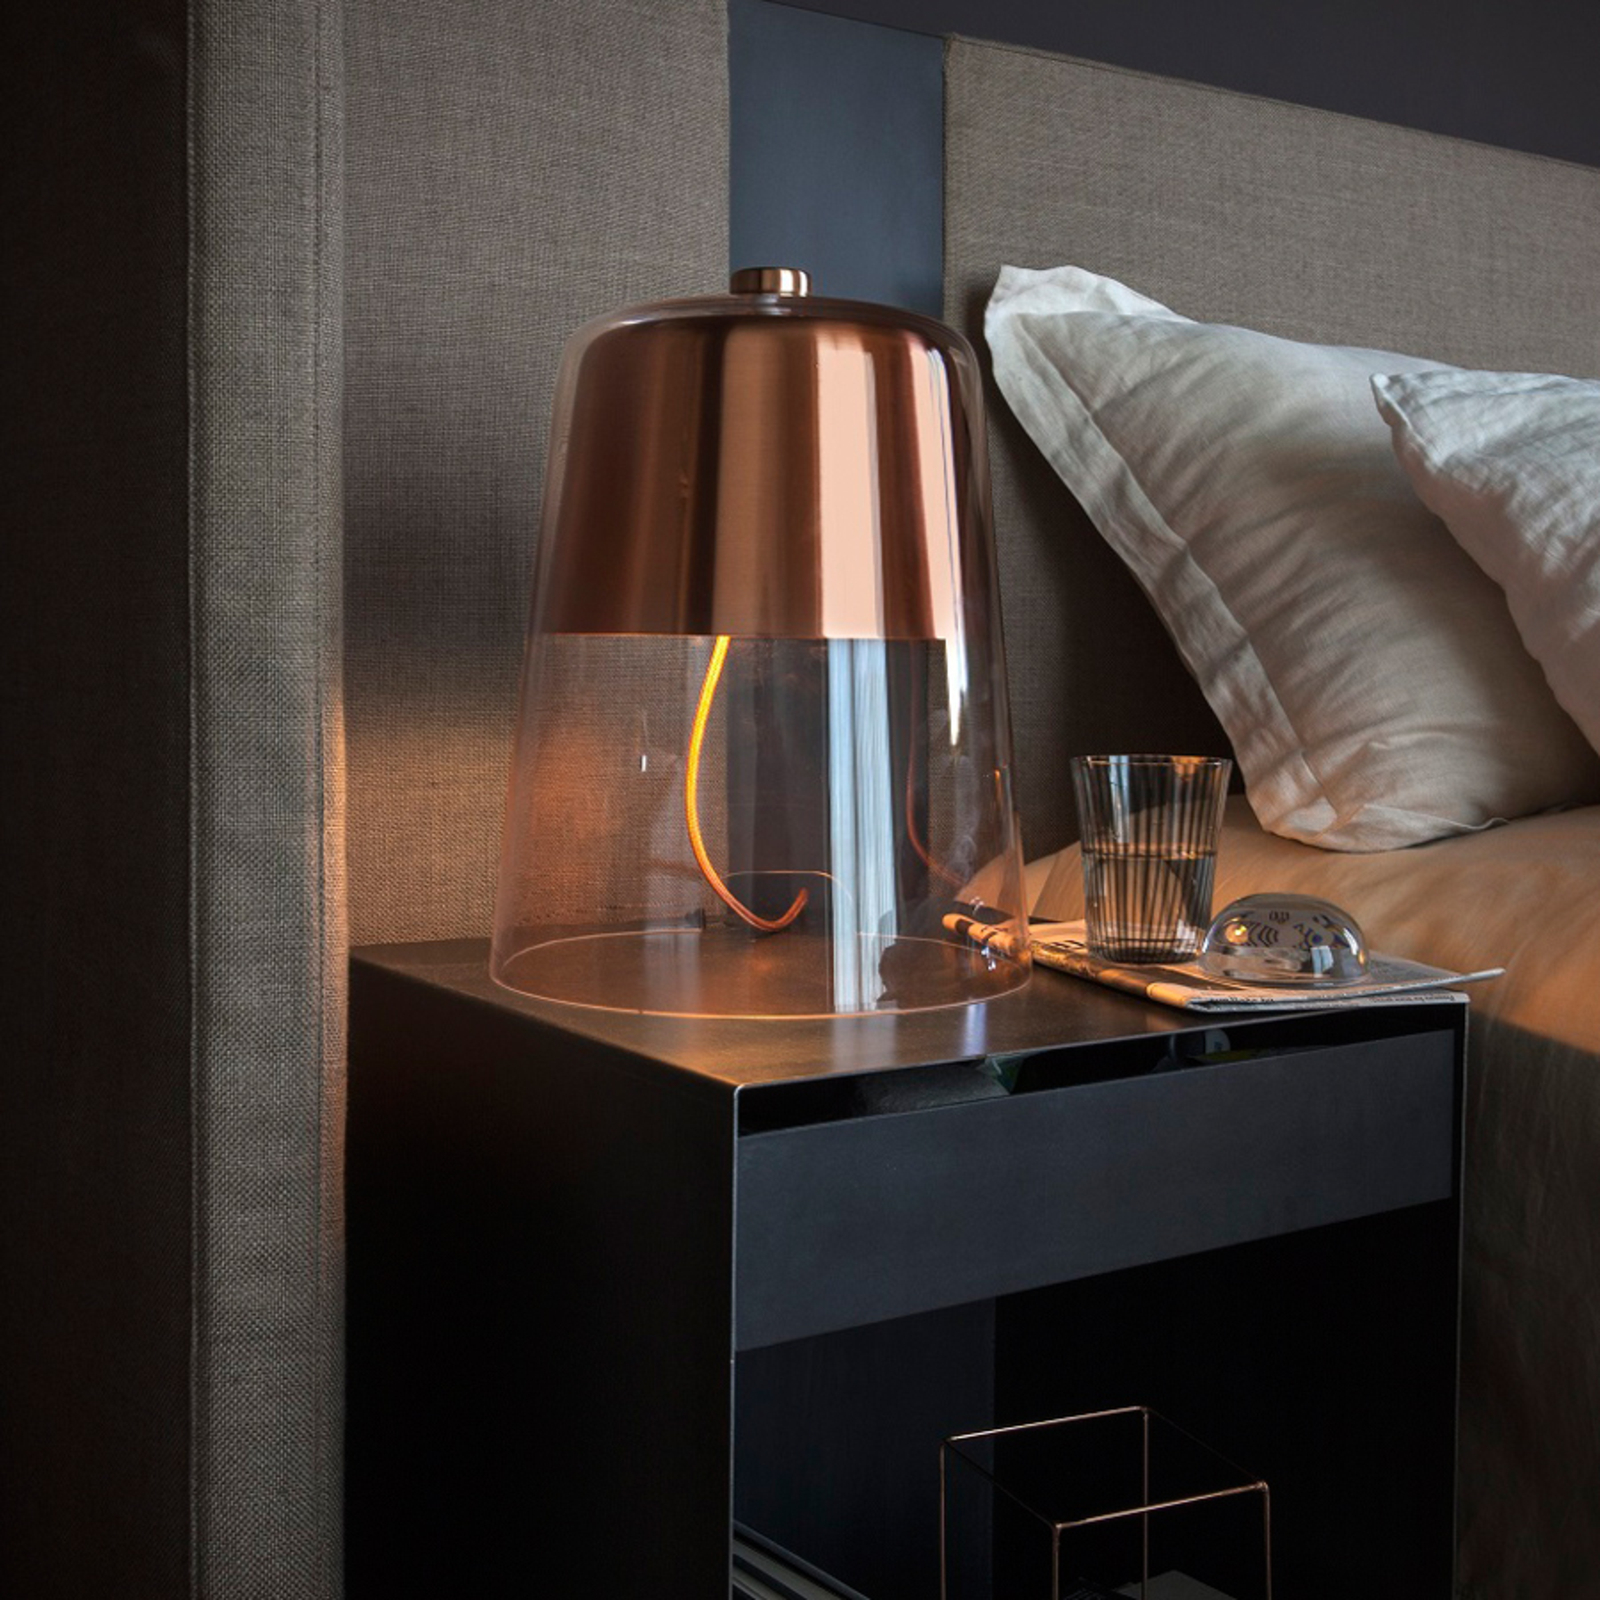 Oluce Semplice - dimmable table lamp, copper